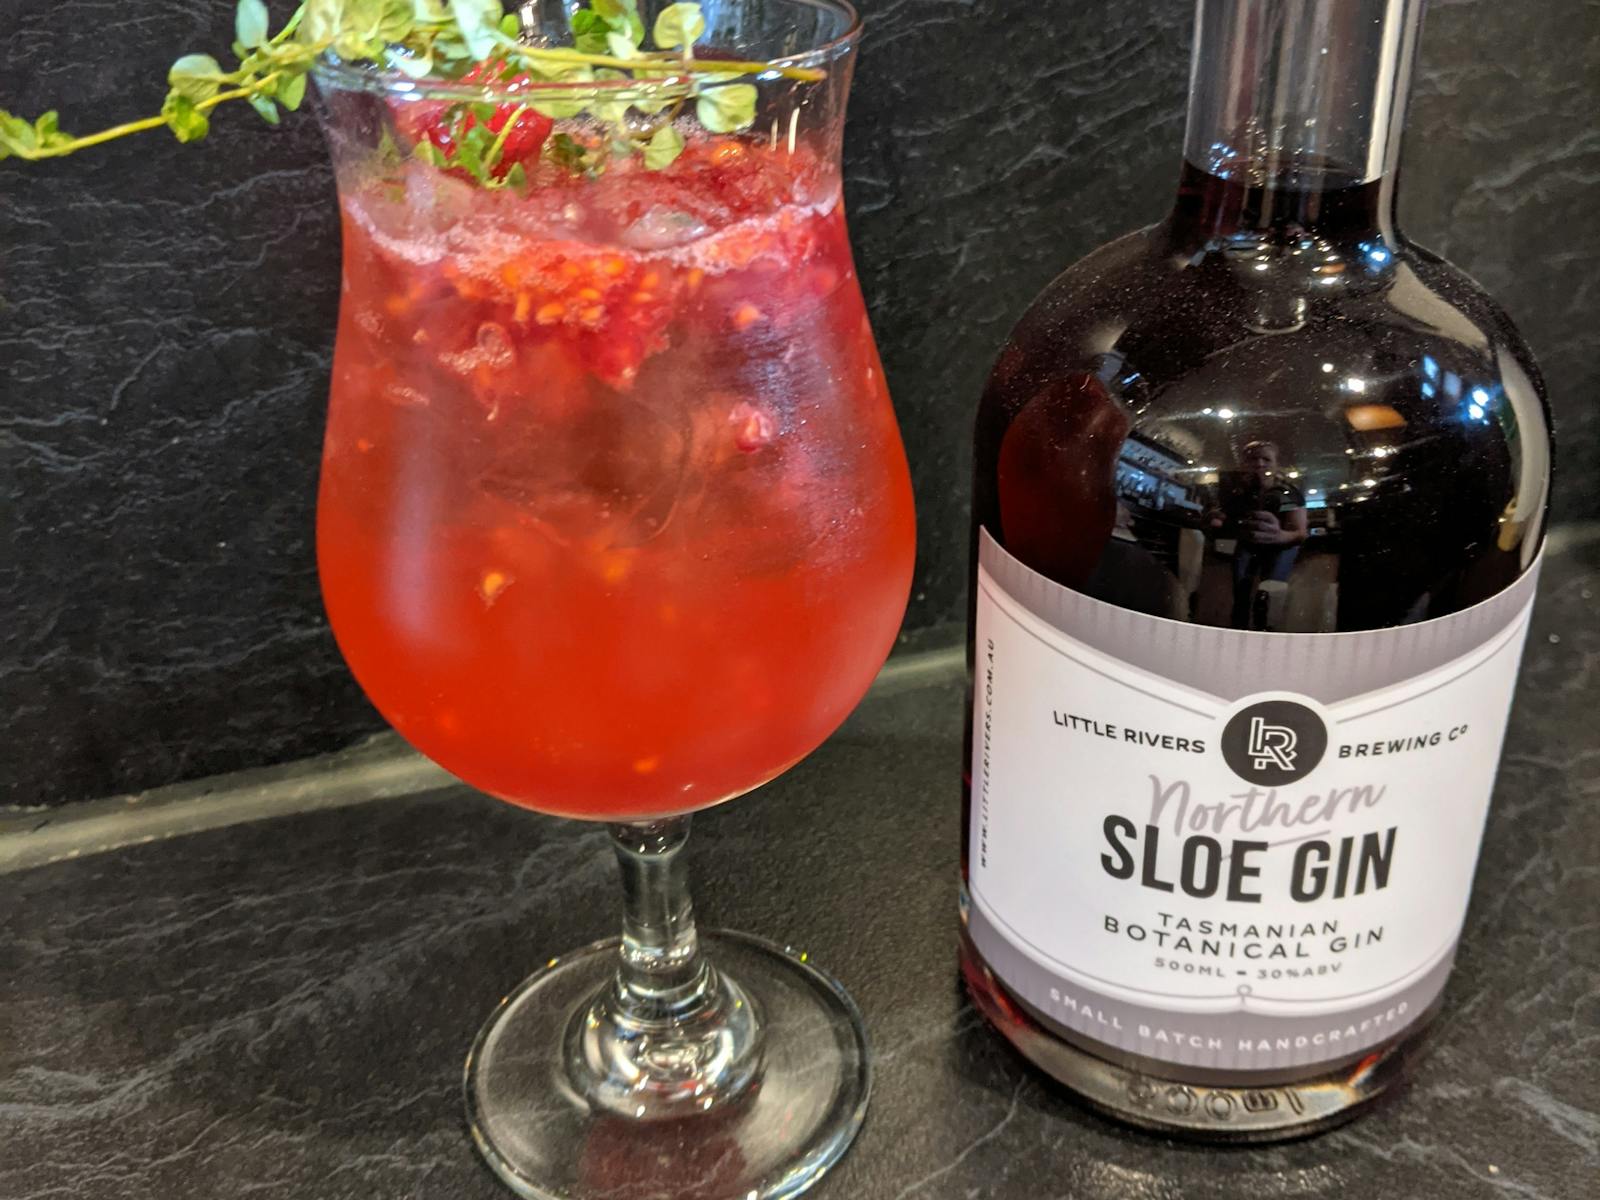 Cocktails made with local Little Rivers Sloe Gin